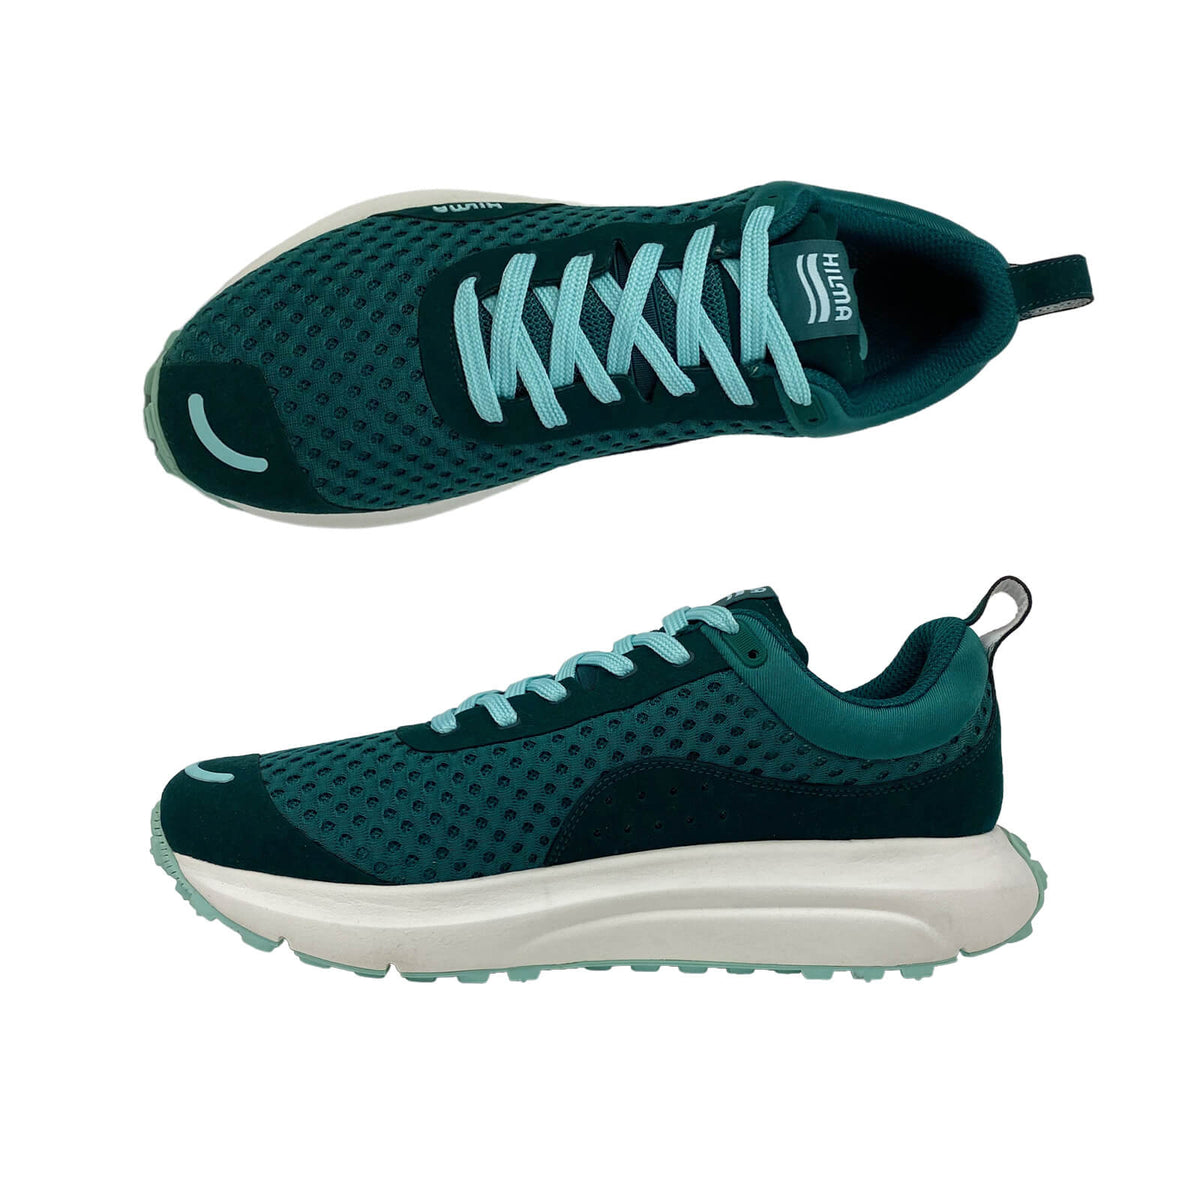 Top and Side Angle view of the Hilma Running Shoe in Evergreen